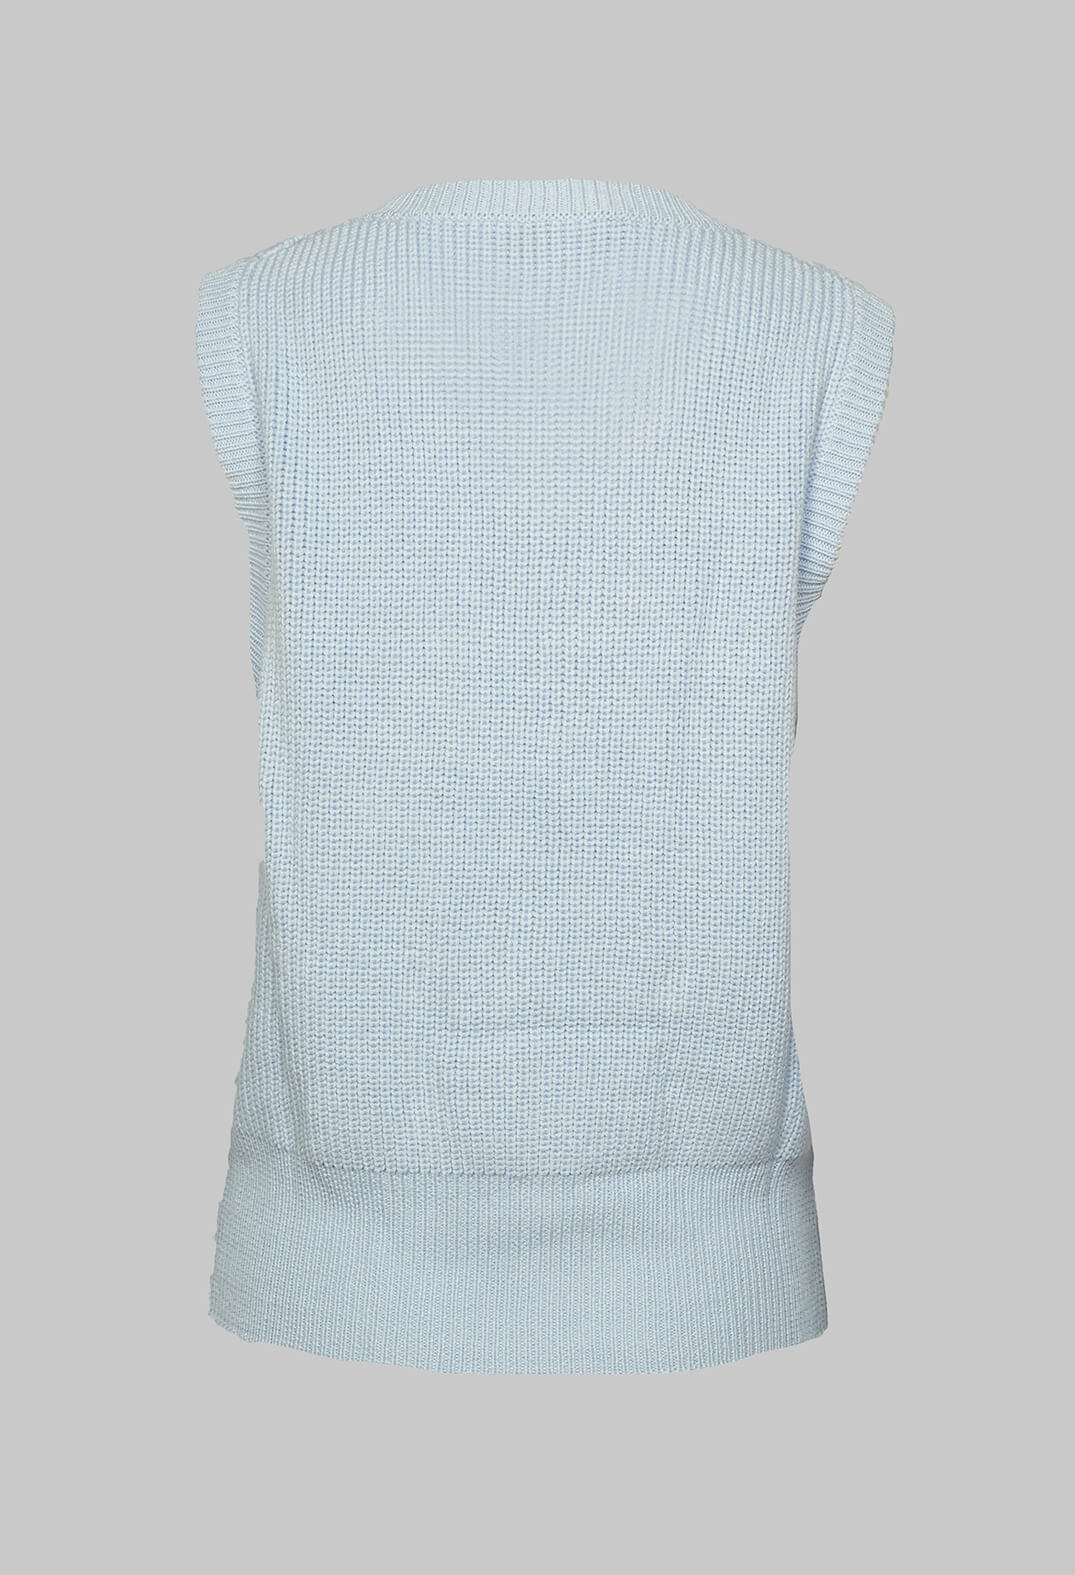 baby blue v neck crochet tank top from Beatrice B collection